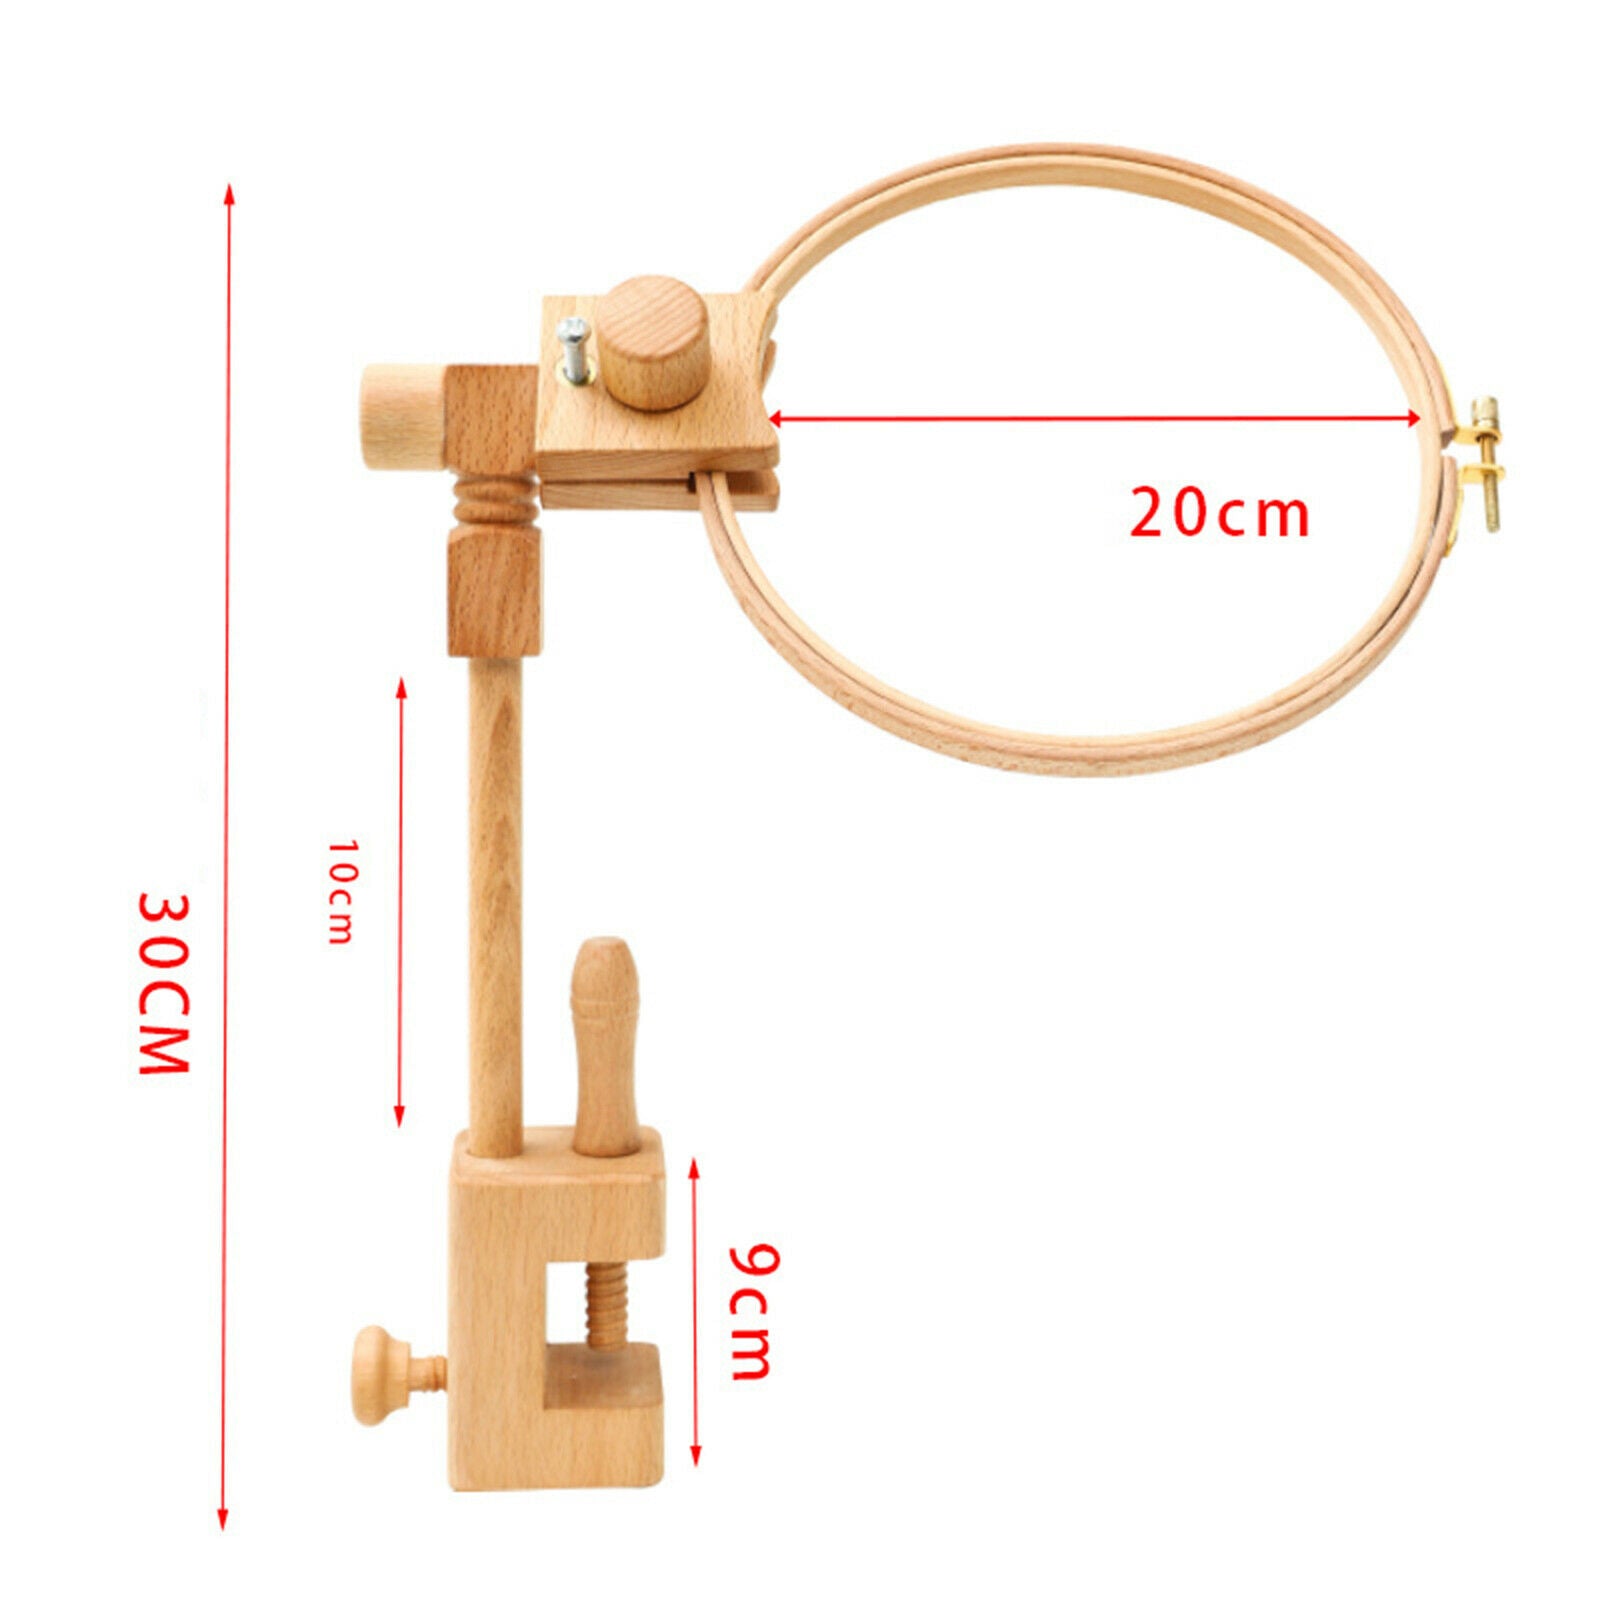 Beech Wood Embroidery Hoop Stand 360 Rotation Adjustable Cross Stitch Frame